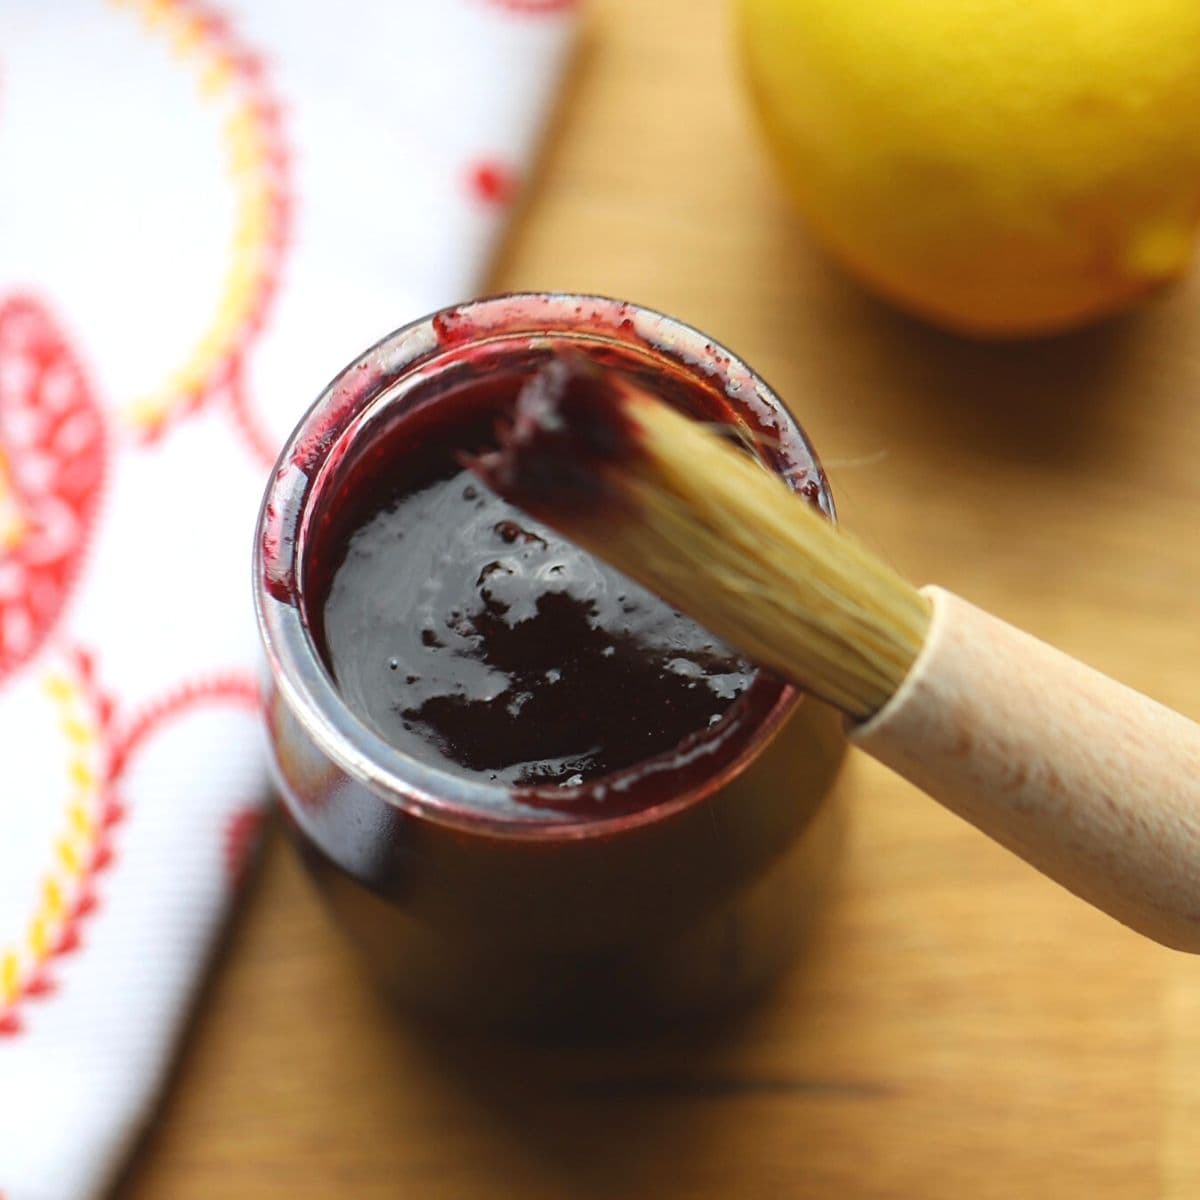 Cherry sauce in glass jar with pastry brush.